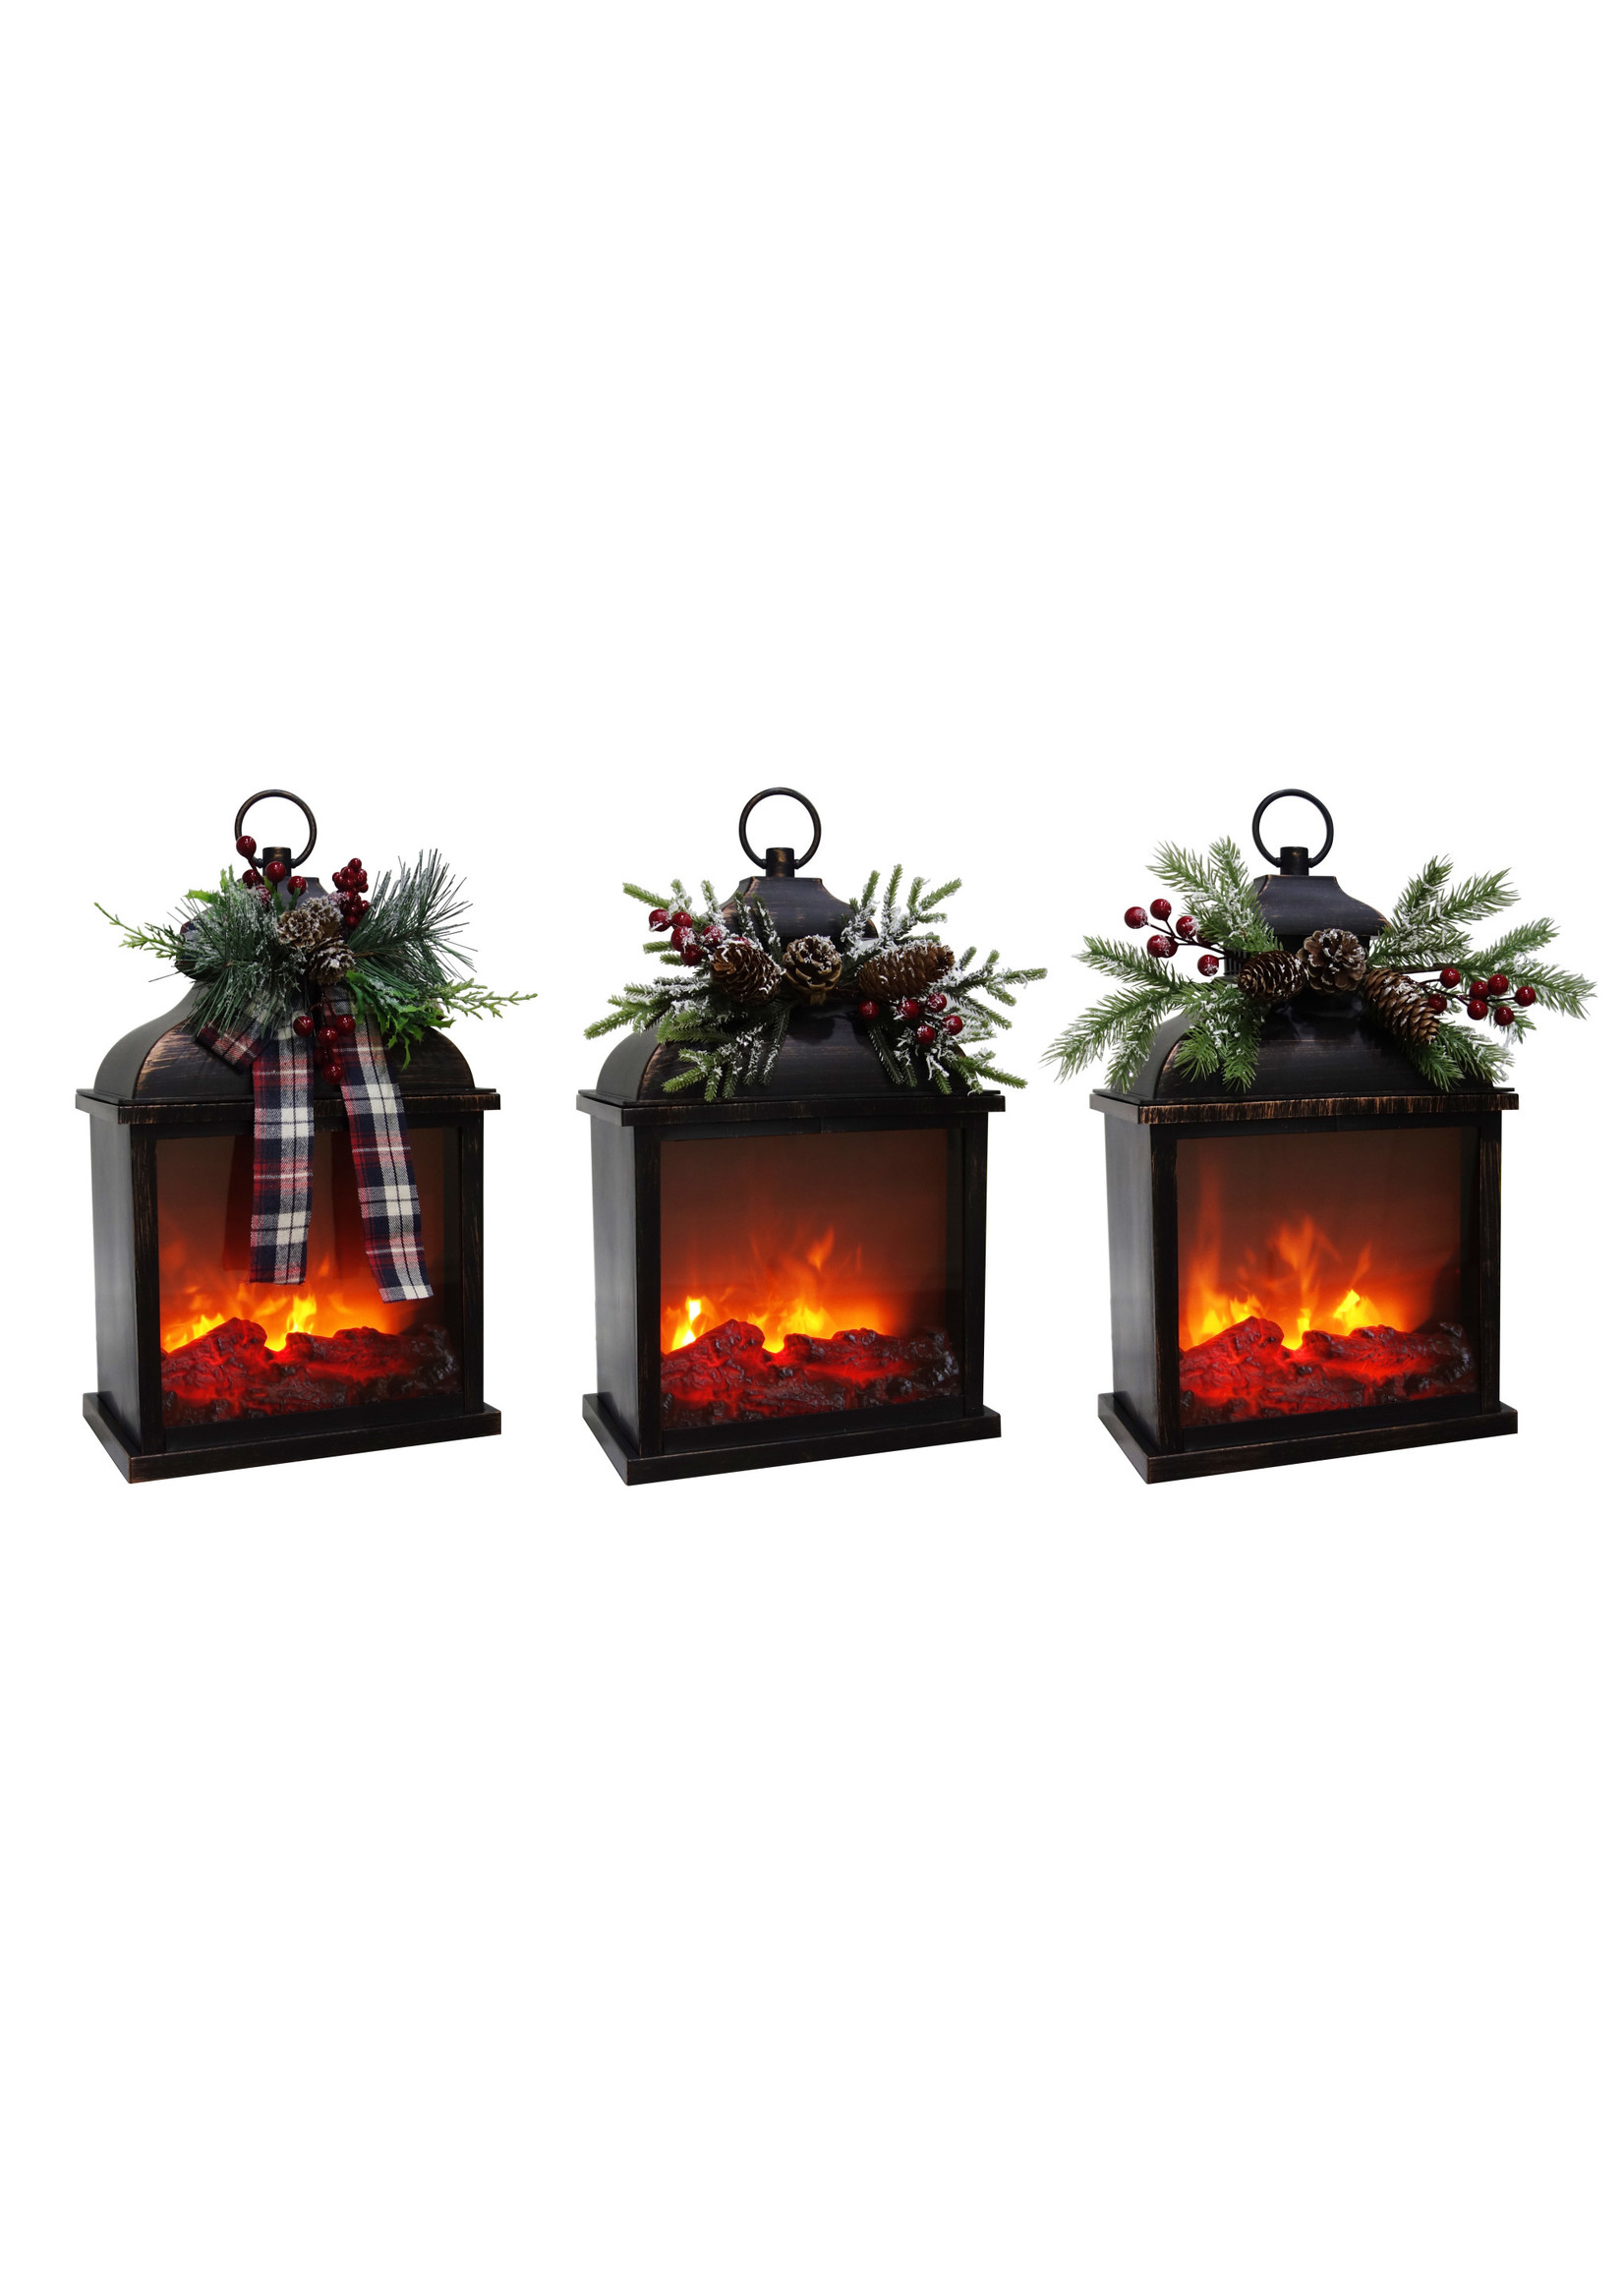 Christmas is Forever 9.8"x15" Bronze Christmas Greens Fireplace Lantern